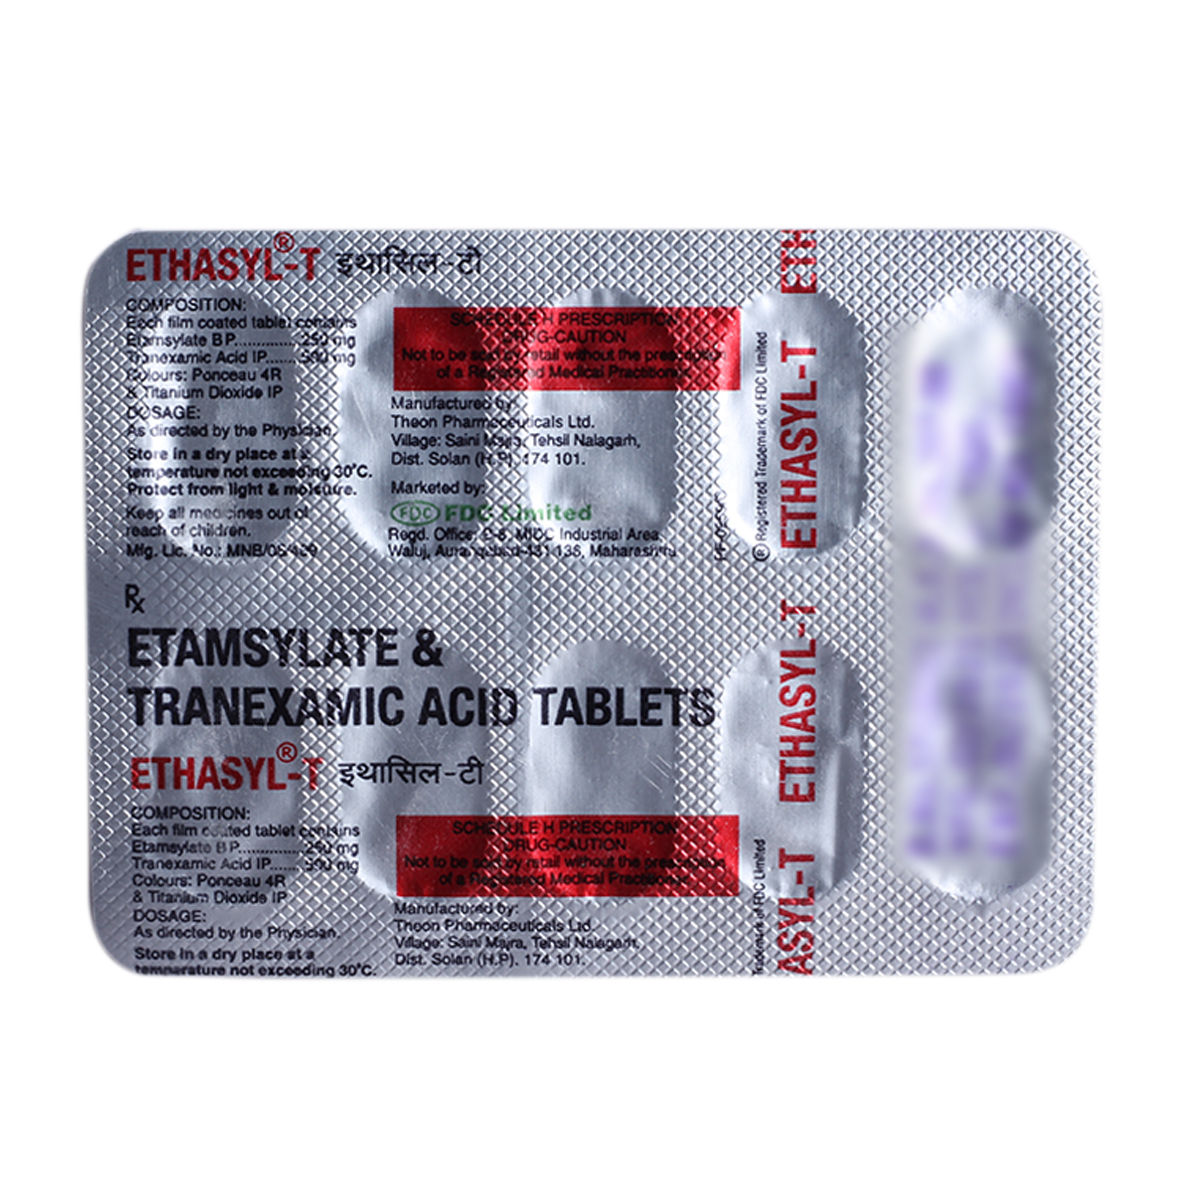 Ethasyl-T Tablet Price, Uses, Side Effects, Composition - Apollo ...